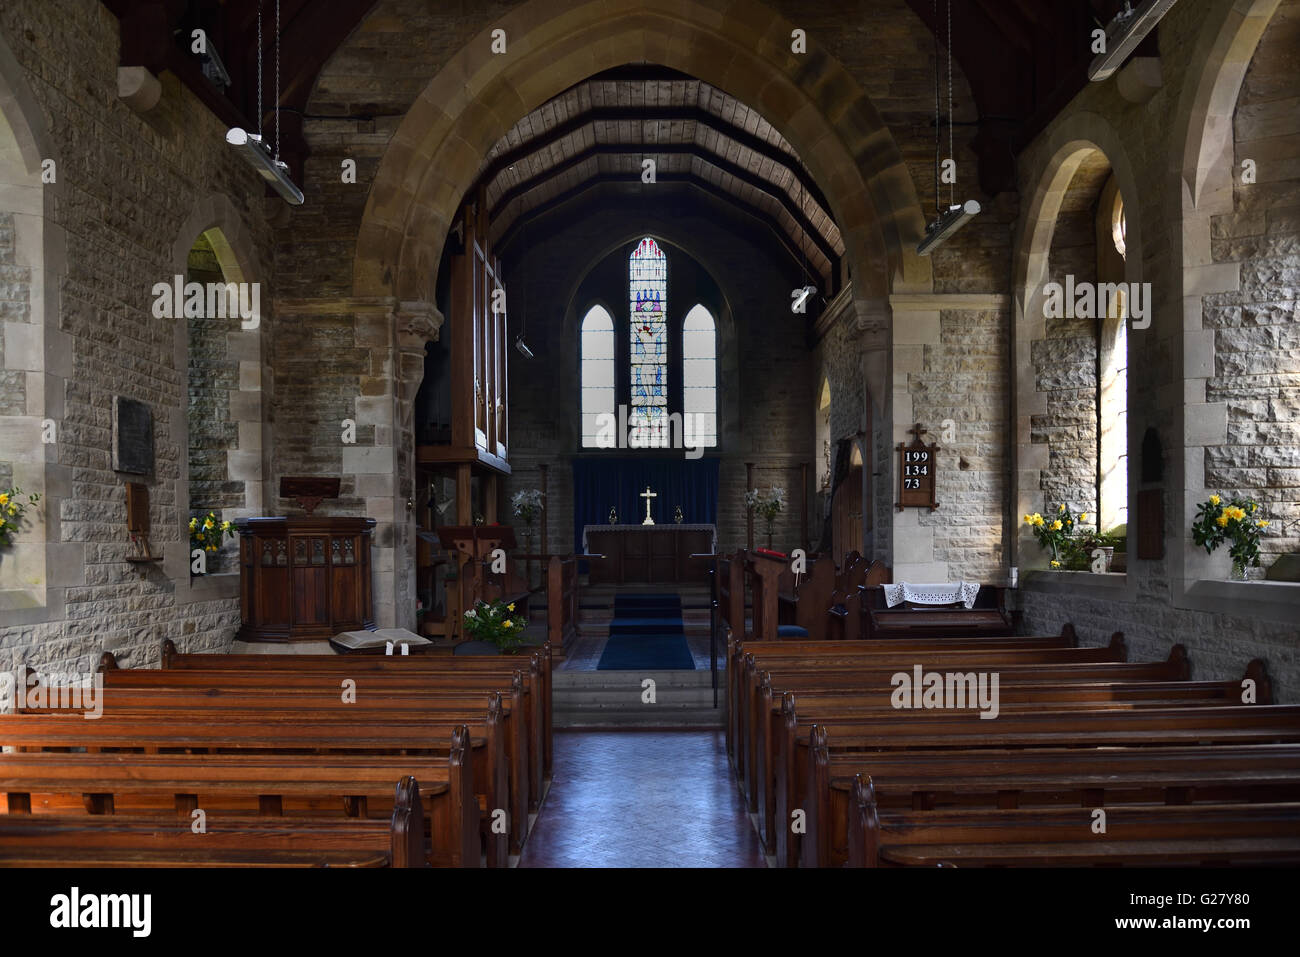 Interior of St Mary and St John church, Hardraw viilage, Upper Wensleydale, Yorkshire Dales, North Yorkshire, England, UK. Stock Photo